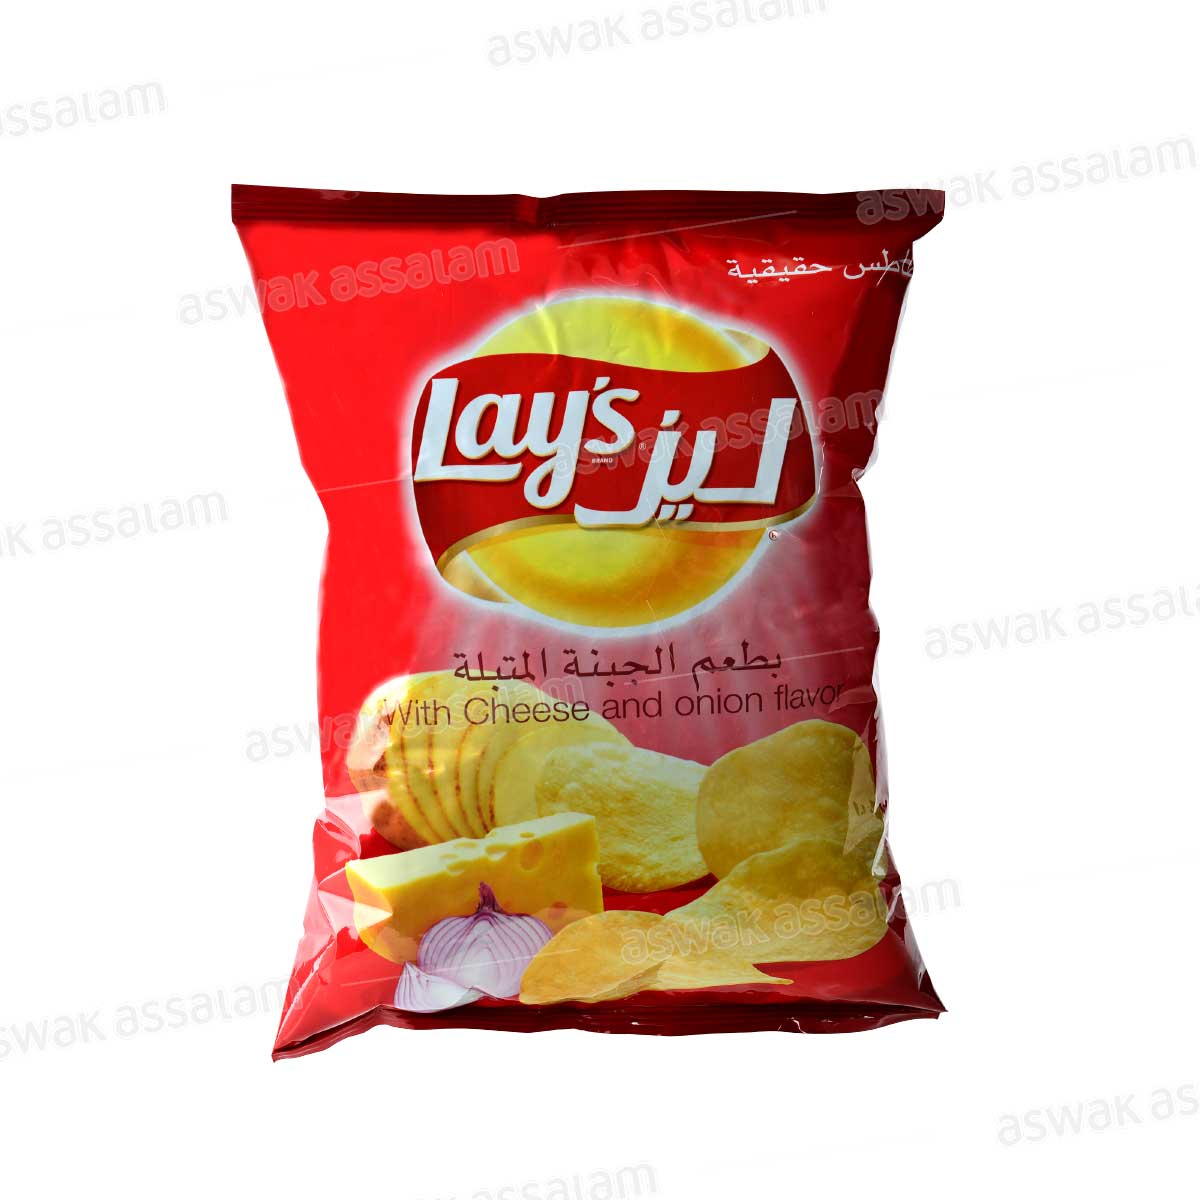 CHIPS SAVEUR CHEESE & ONION 97G LAY'S